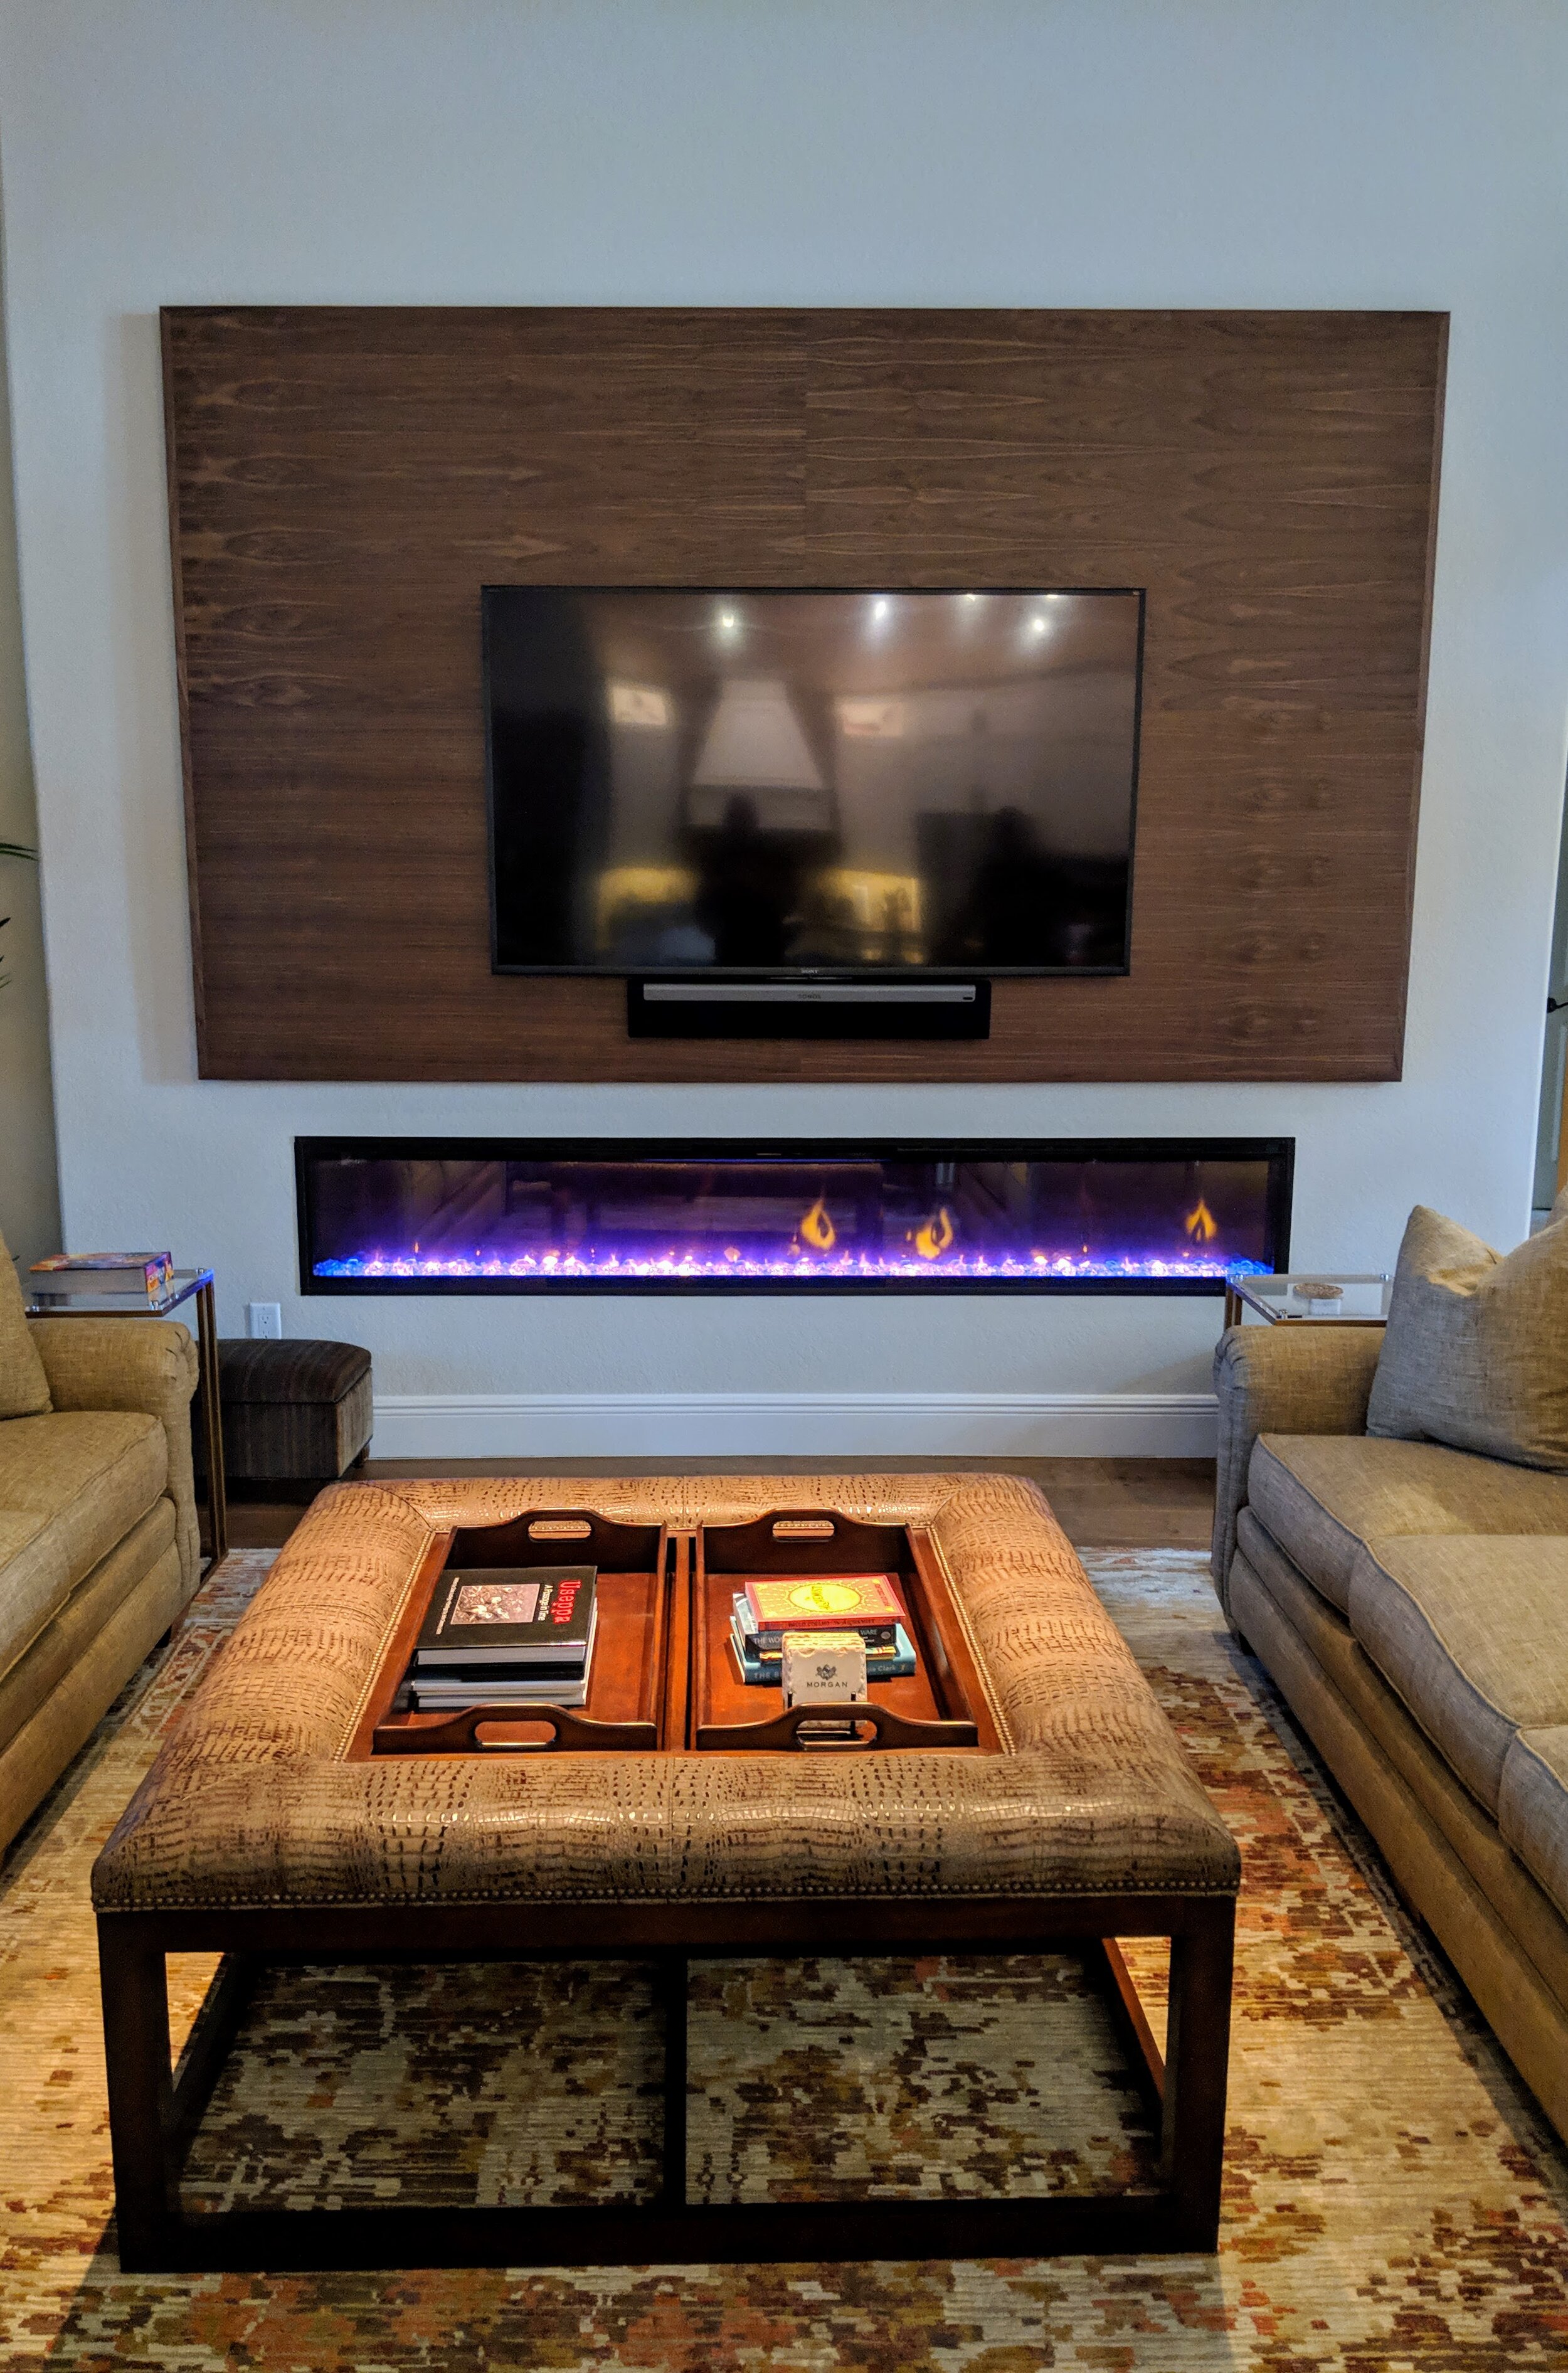 TV installed over fireplace on wooden wall.jpg